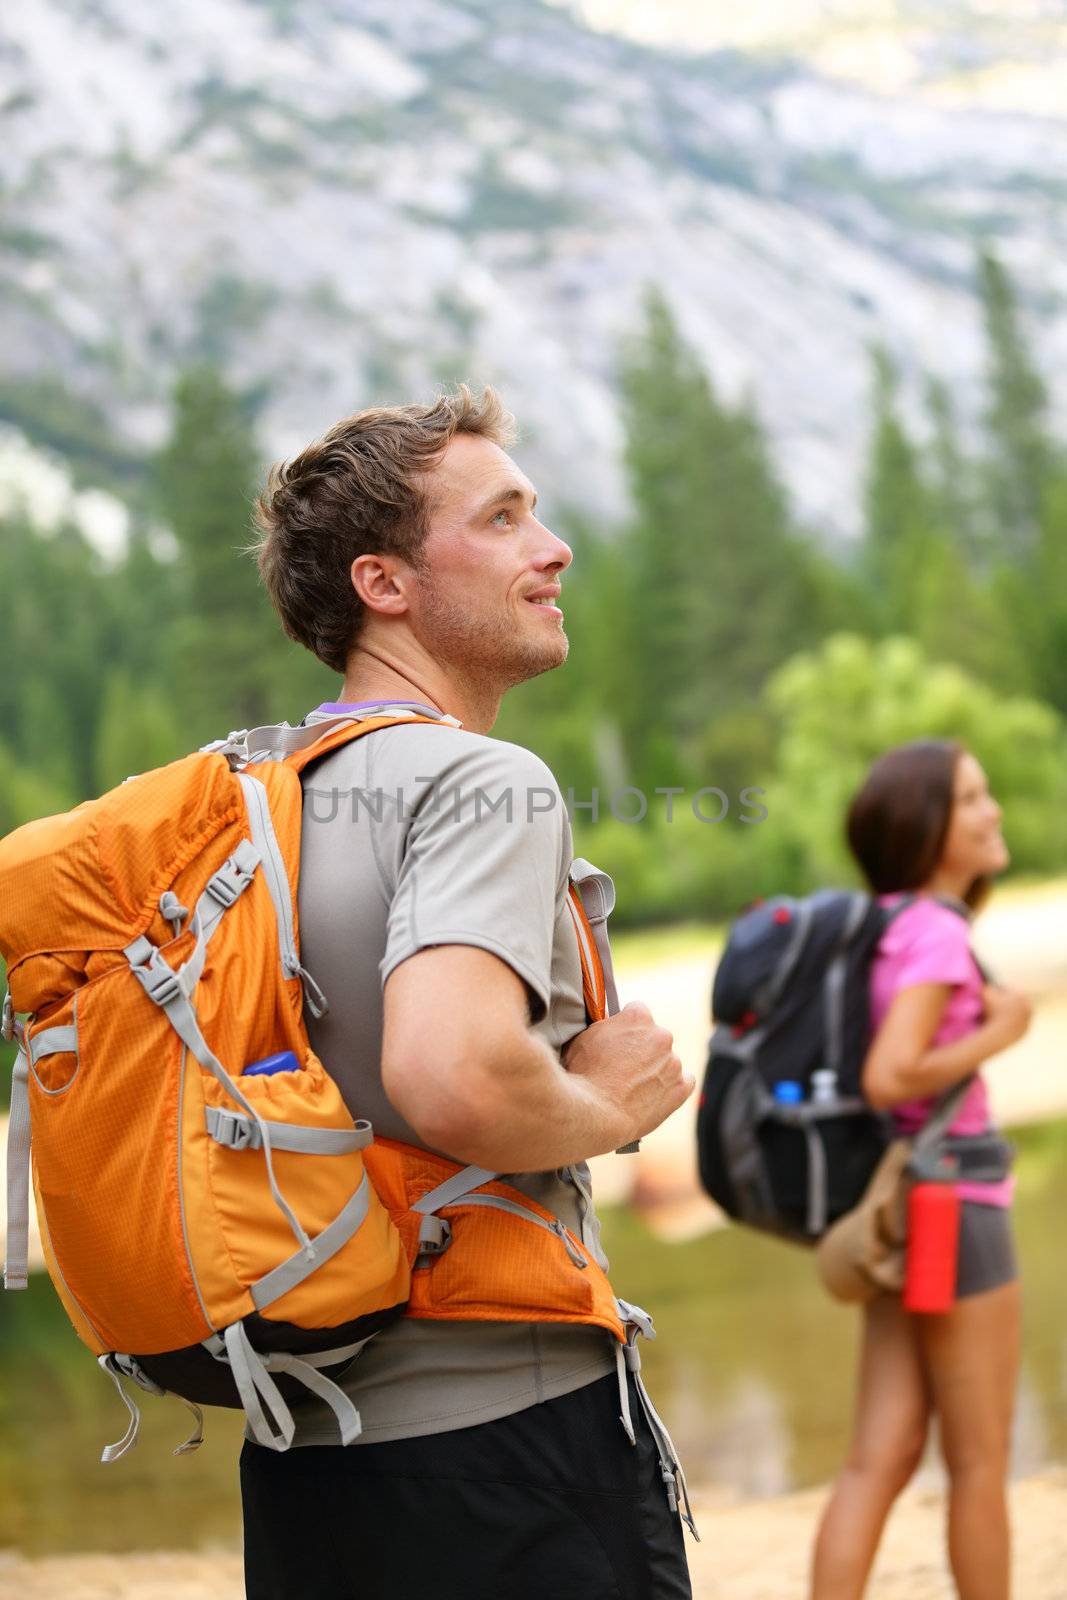 Hiking people - man hiker looking at landscape nature with mountains and woman in background. Happy multiracial young couple trekking outdoors in Yosemite National Park., California, United States.